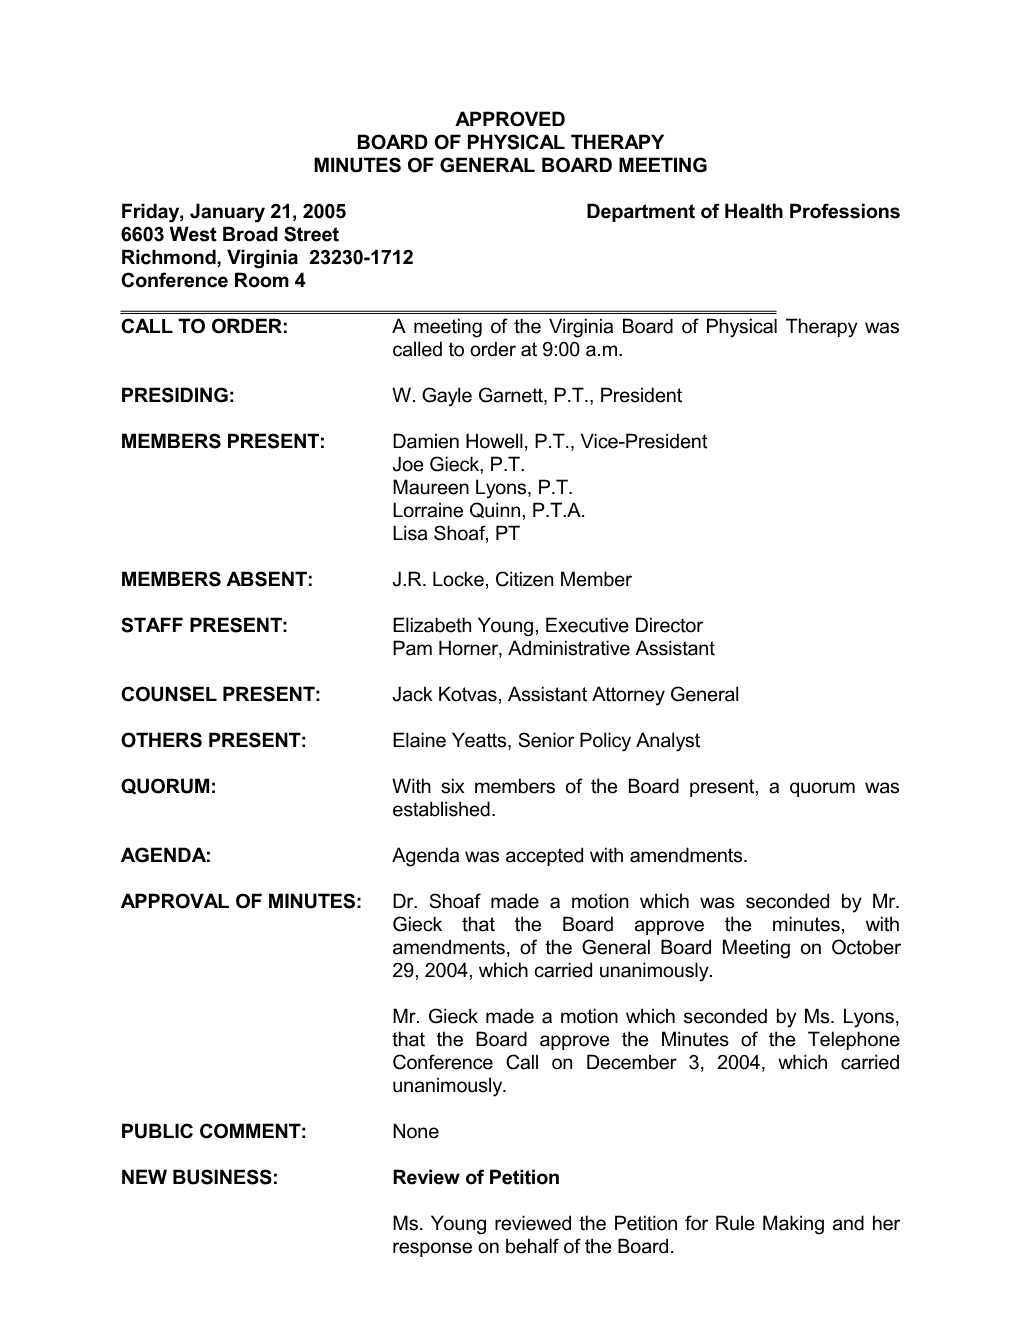 Physical Therapy-Board Meeting Minutes - January 21, 2005